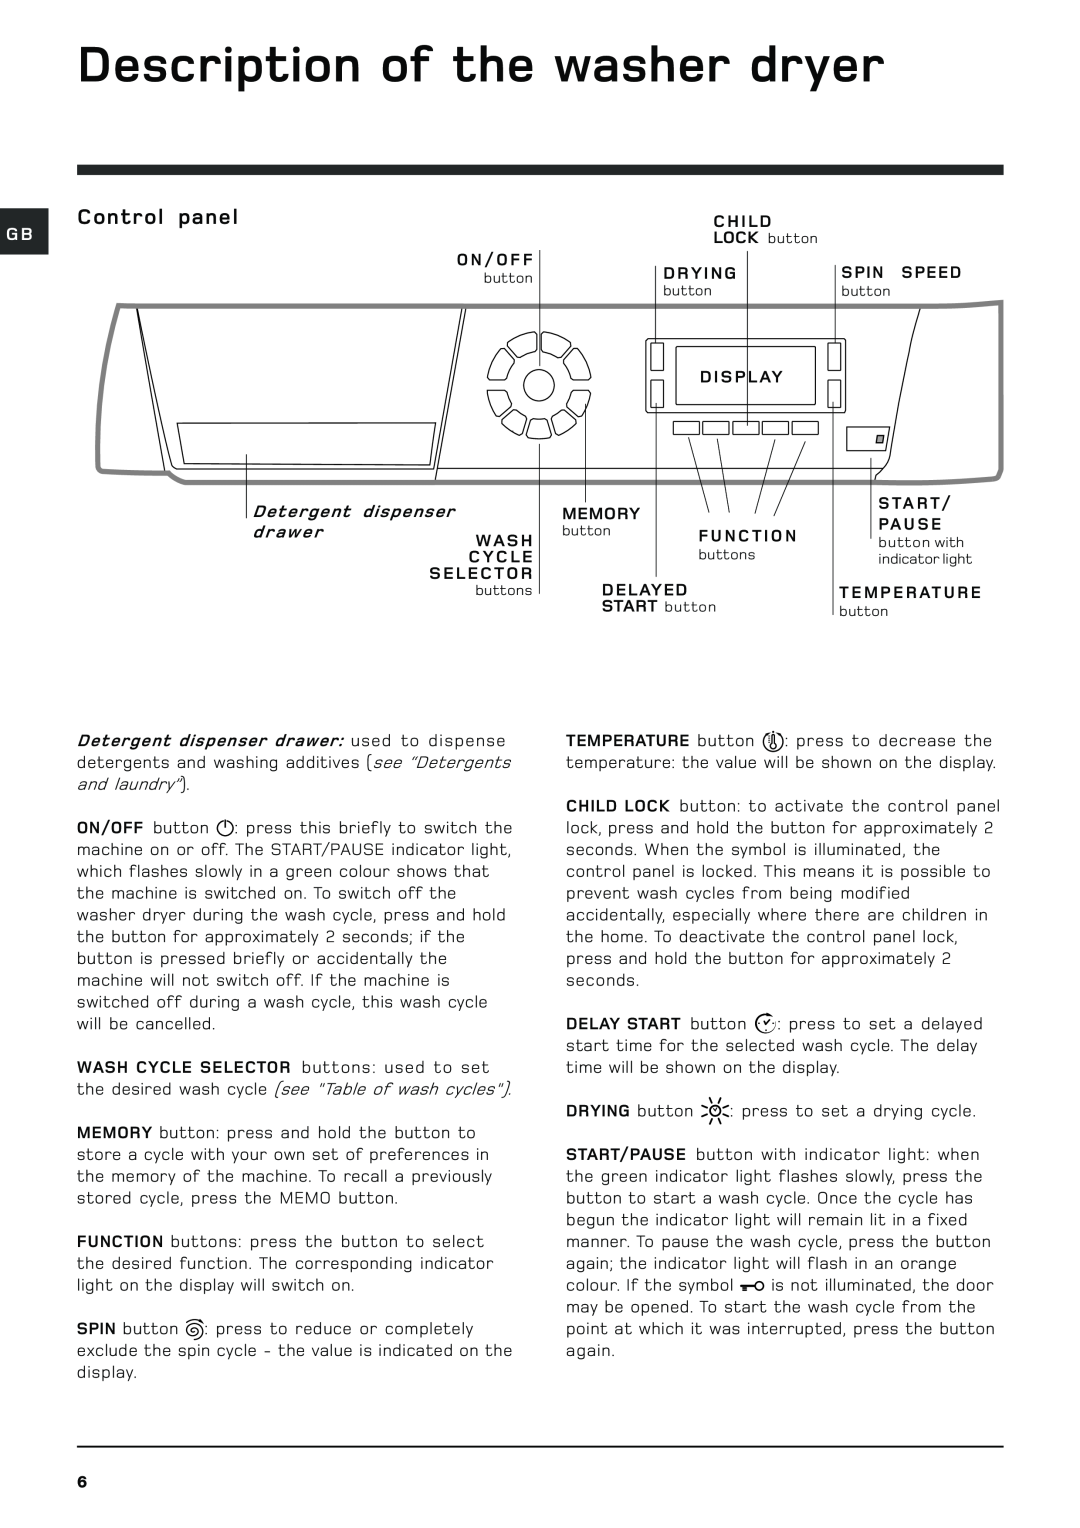 Hotpoint wdd960 manual Description of the washer dryer, Control panel 